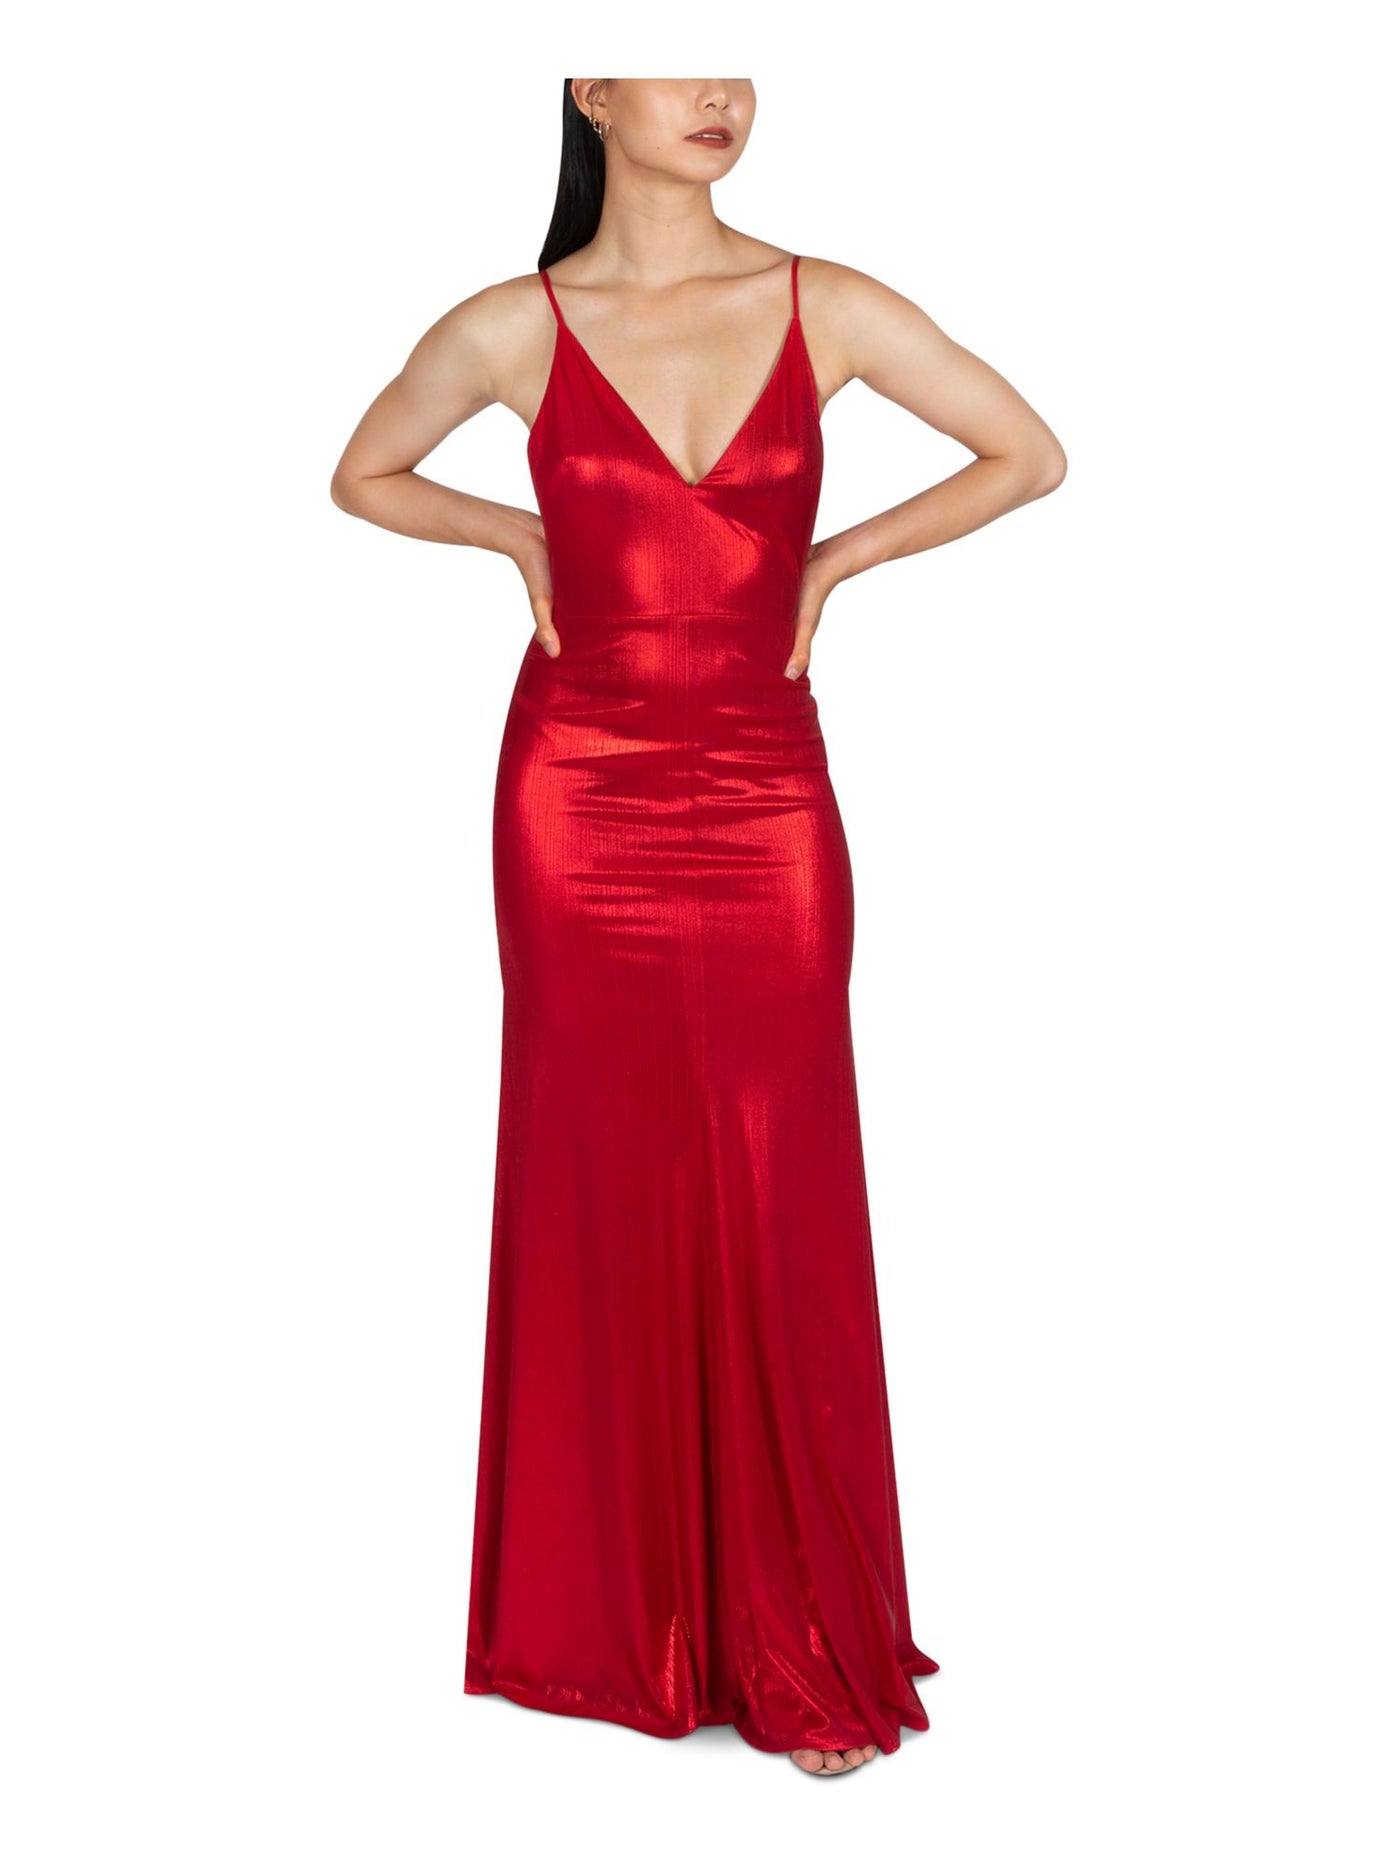 DEAR MOON Womens Red Stretch Zippered Low Back Adjustable Straps Lined Spaghetti Strap V Neck Full-Length Prom Gown Dress Juniors 3